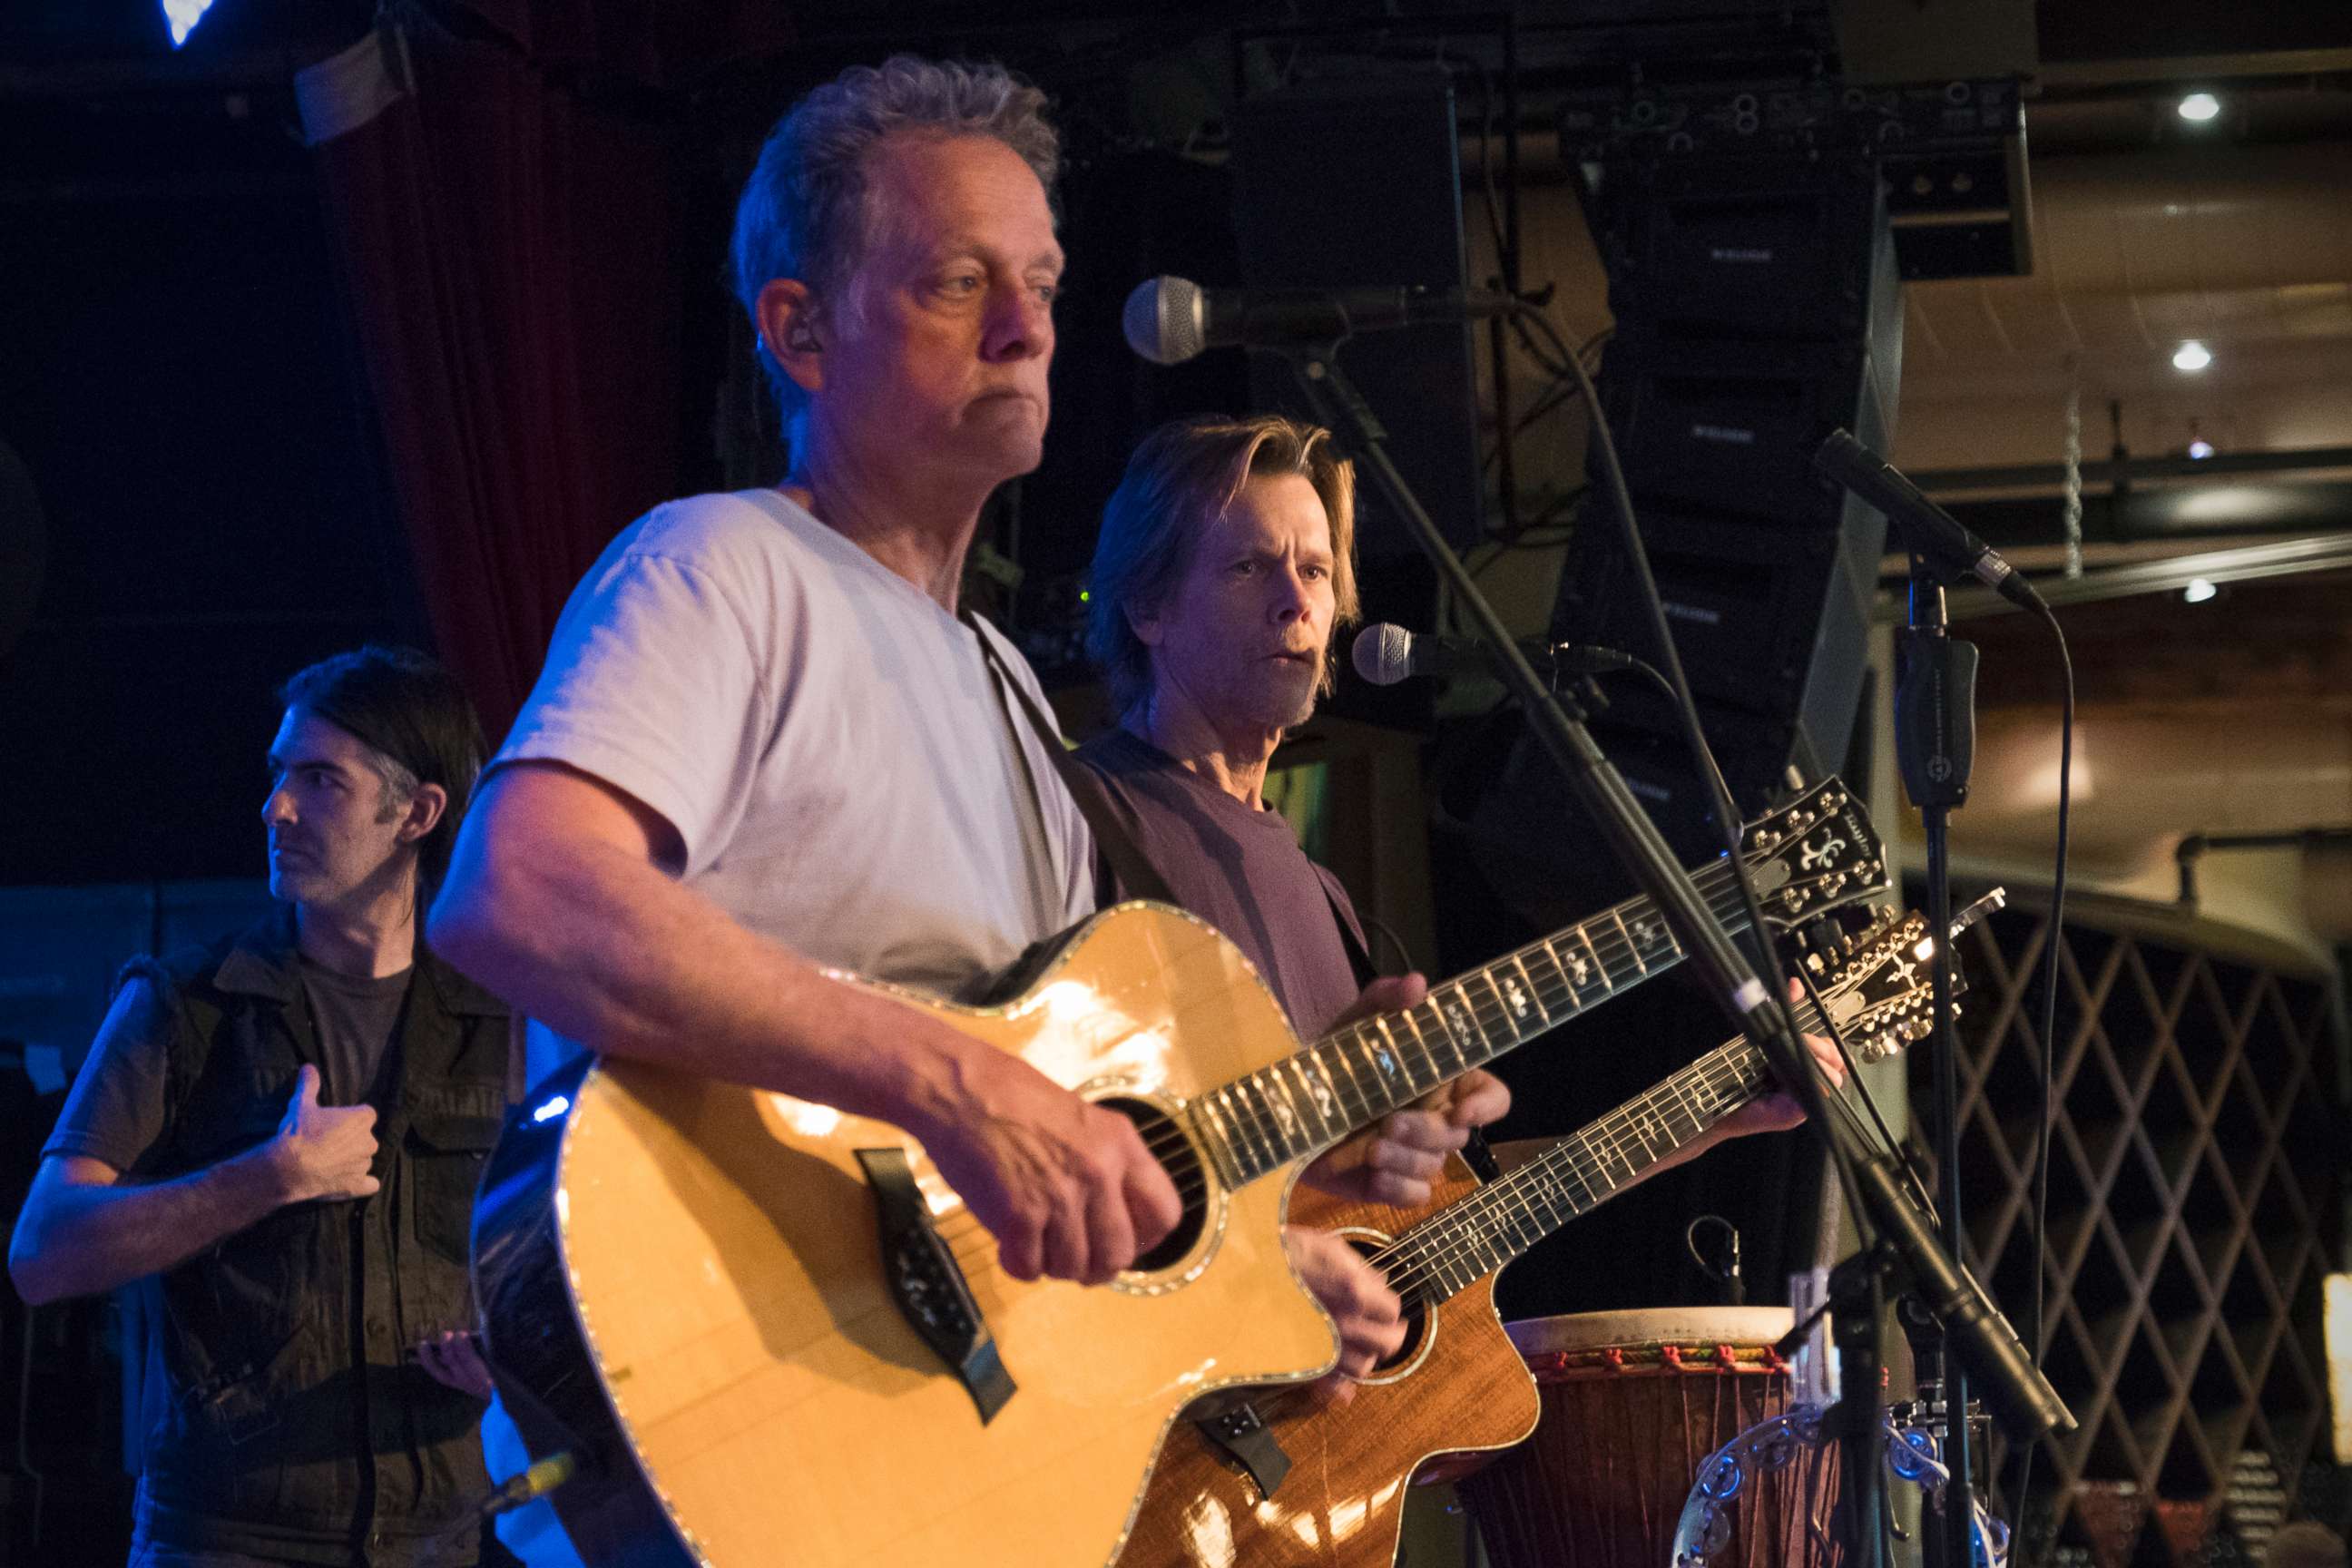 PHOTO: Kevin Bacon sings as his brother Michael Bacon plays guitar at their sound check before their sold out show at City Winery in New York City, on August 22.
